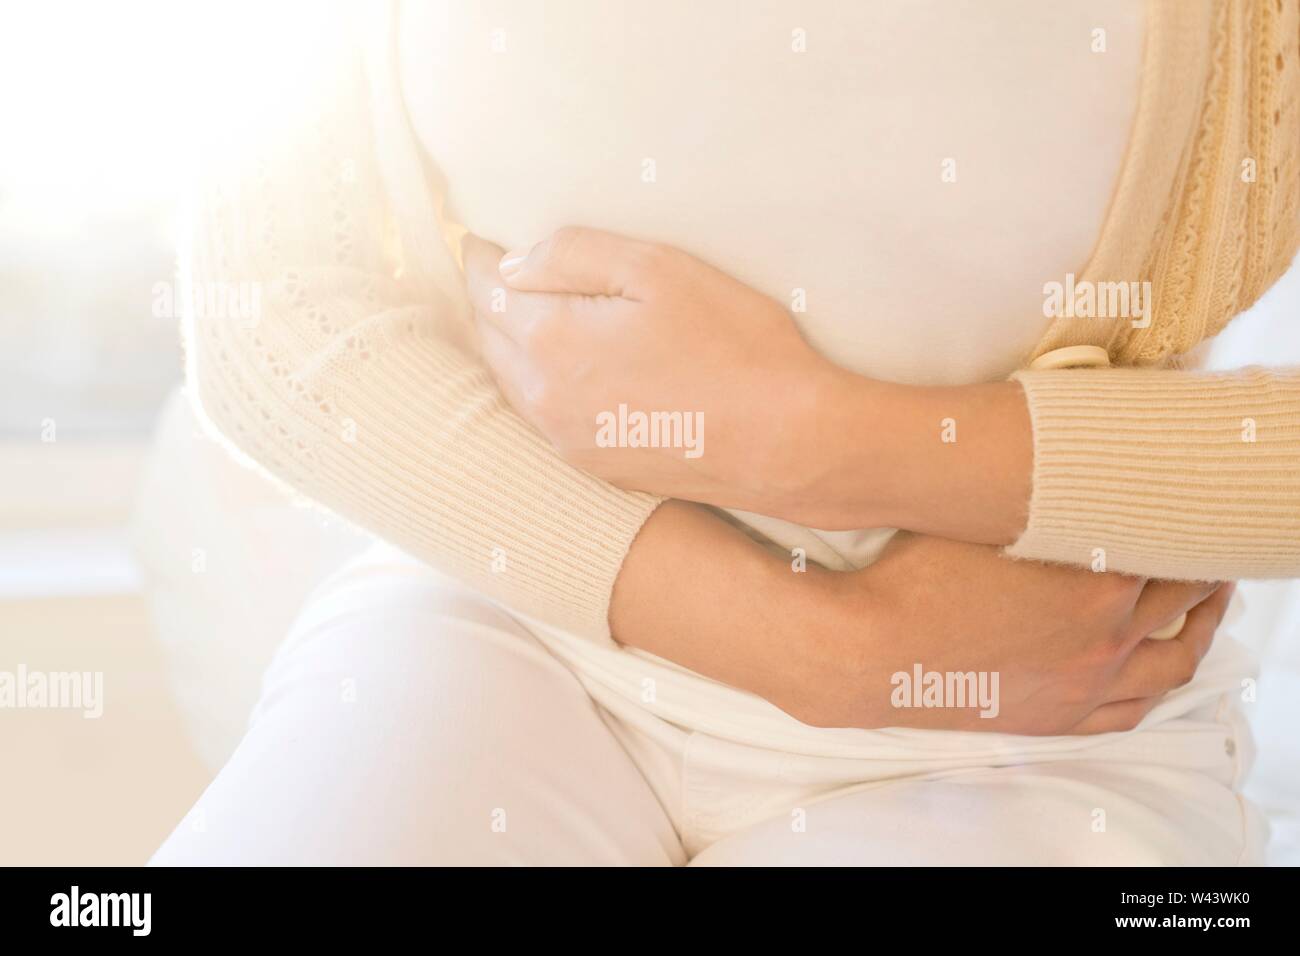 Woman holding stomach in pain. Stock Photo